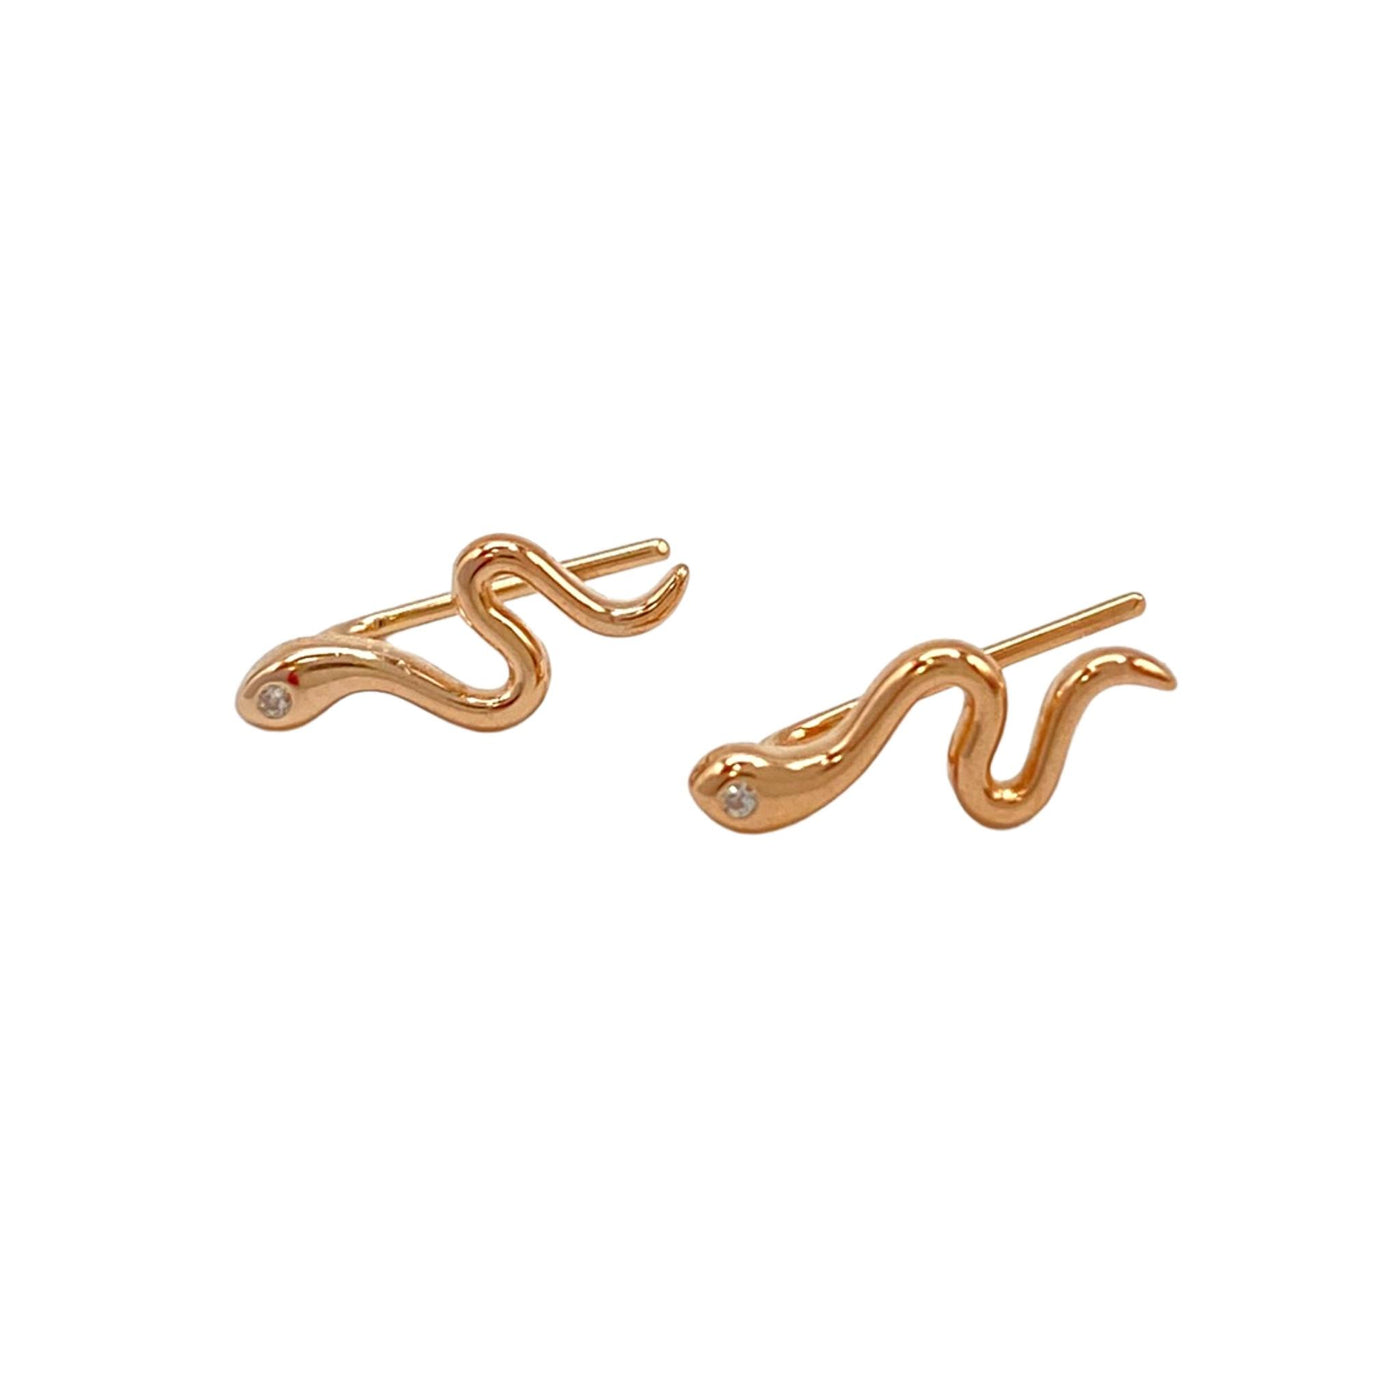 Silver earrings with snake